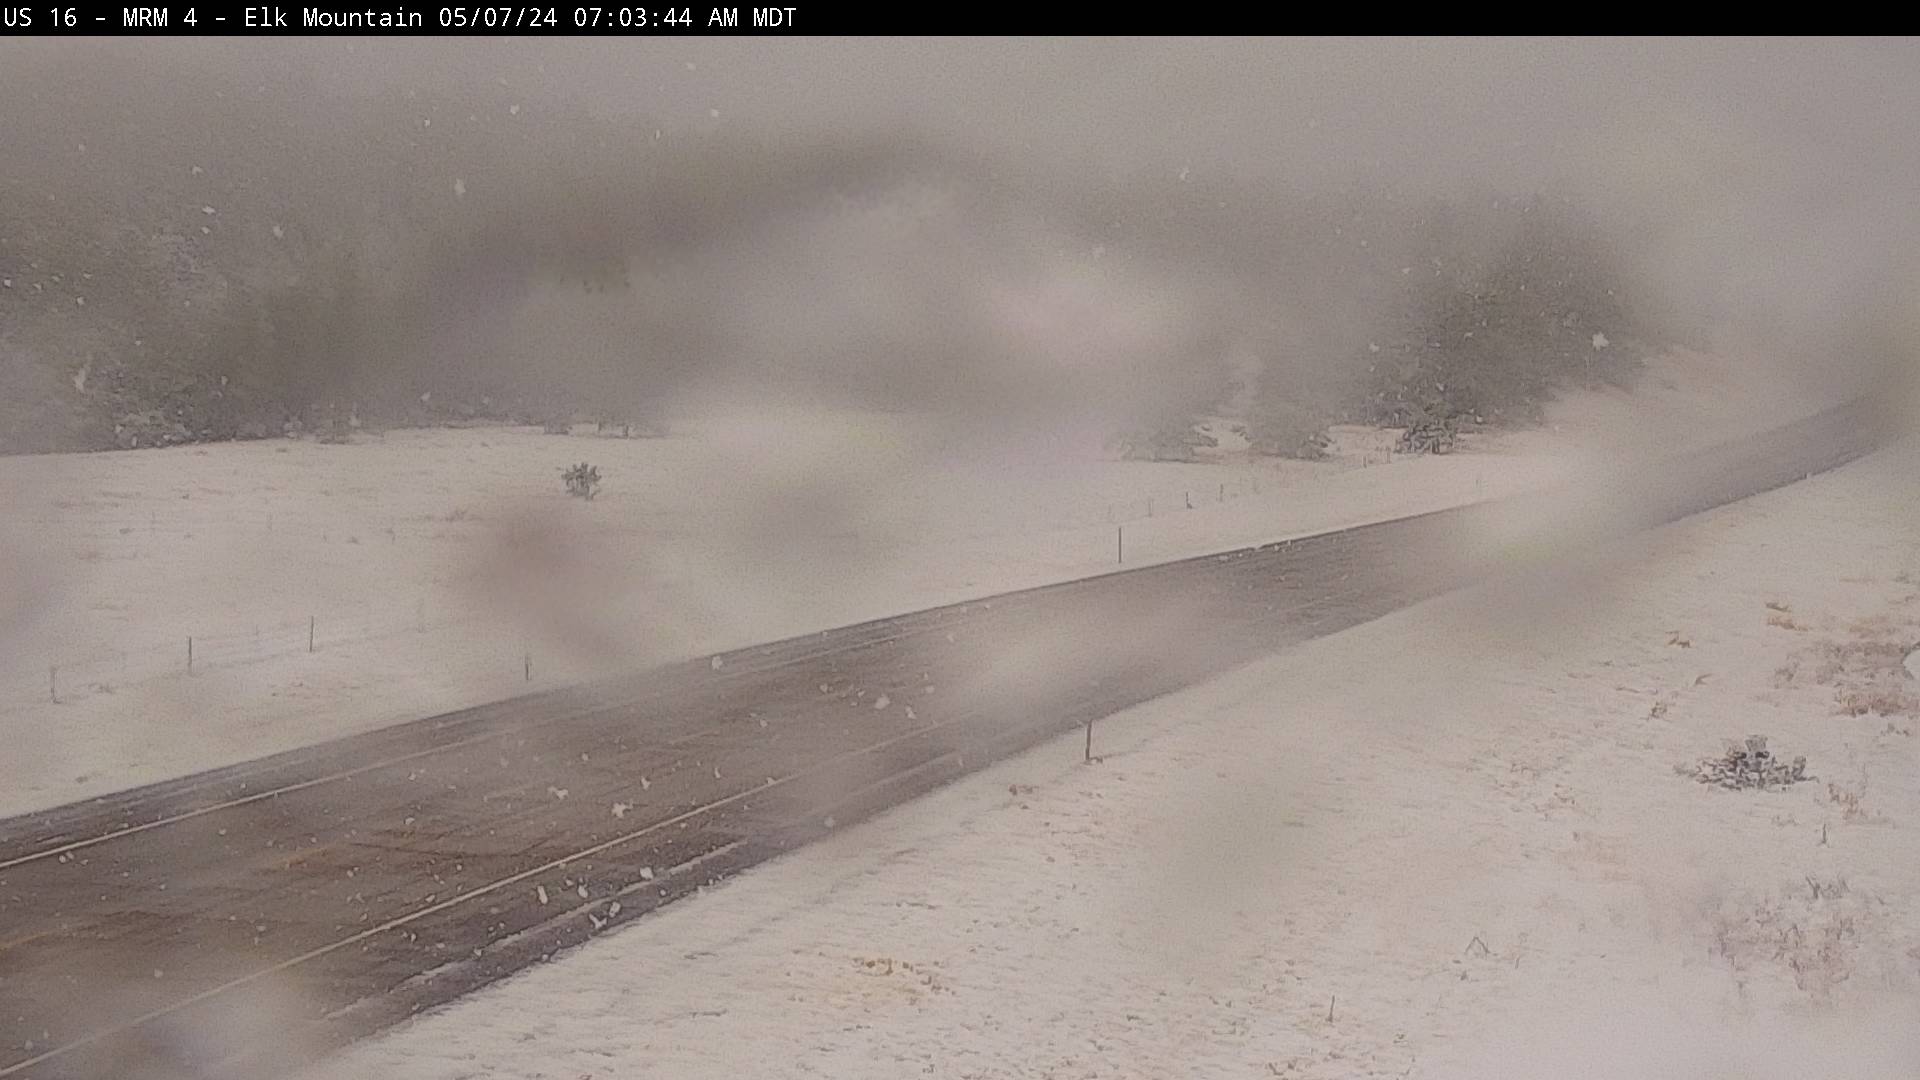 23 miles west of Custer along US-16 @ MM 4 - East Traffic Camera